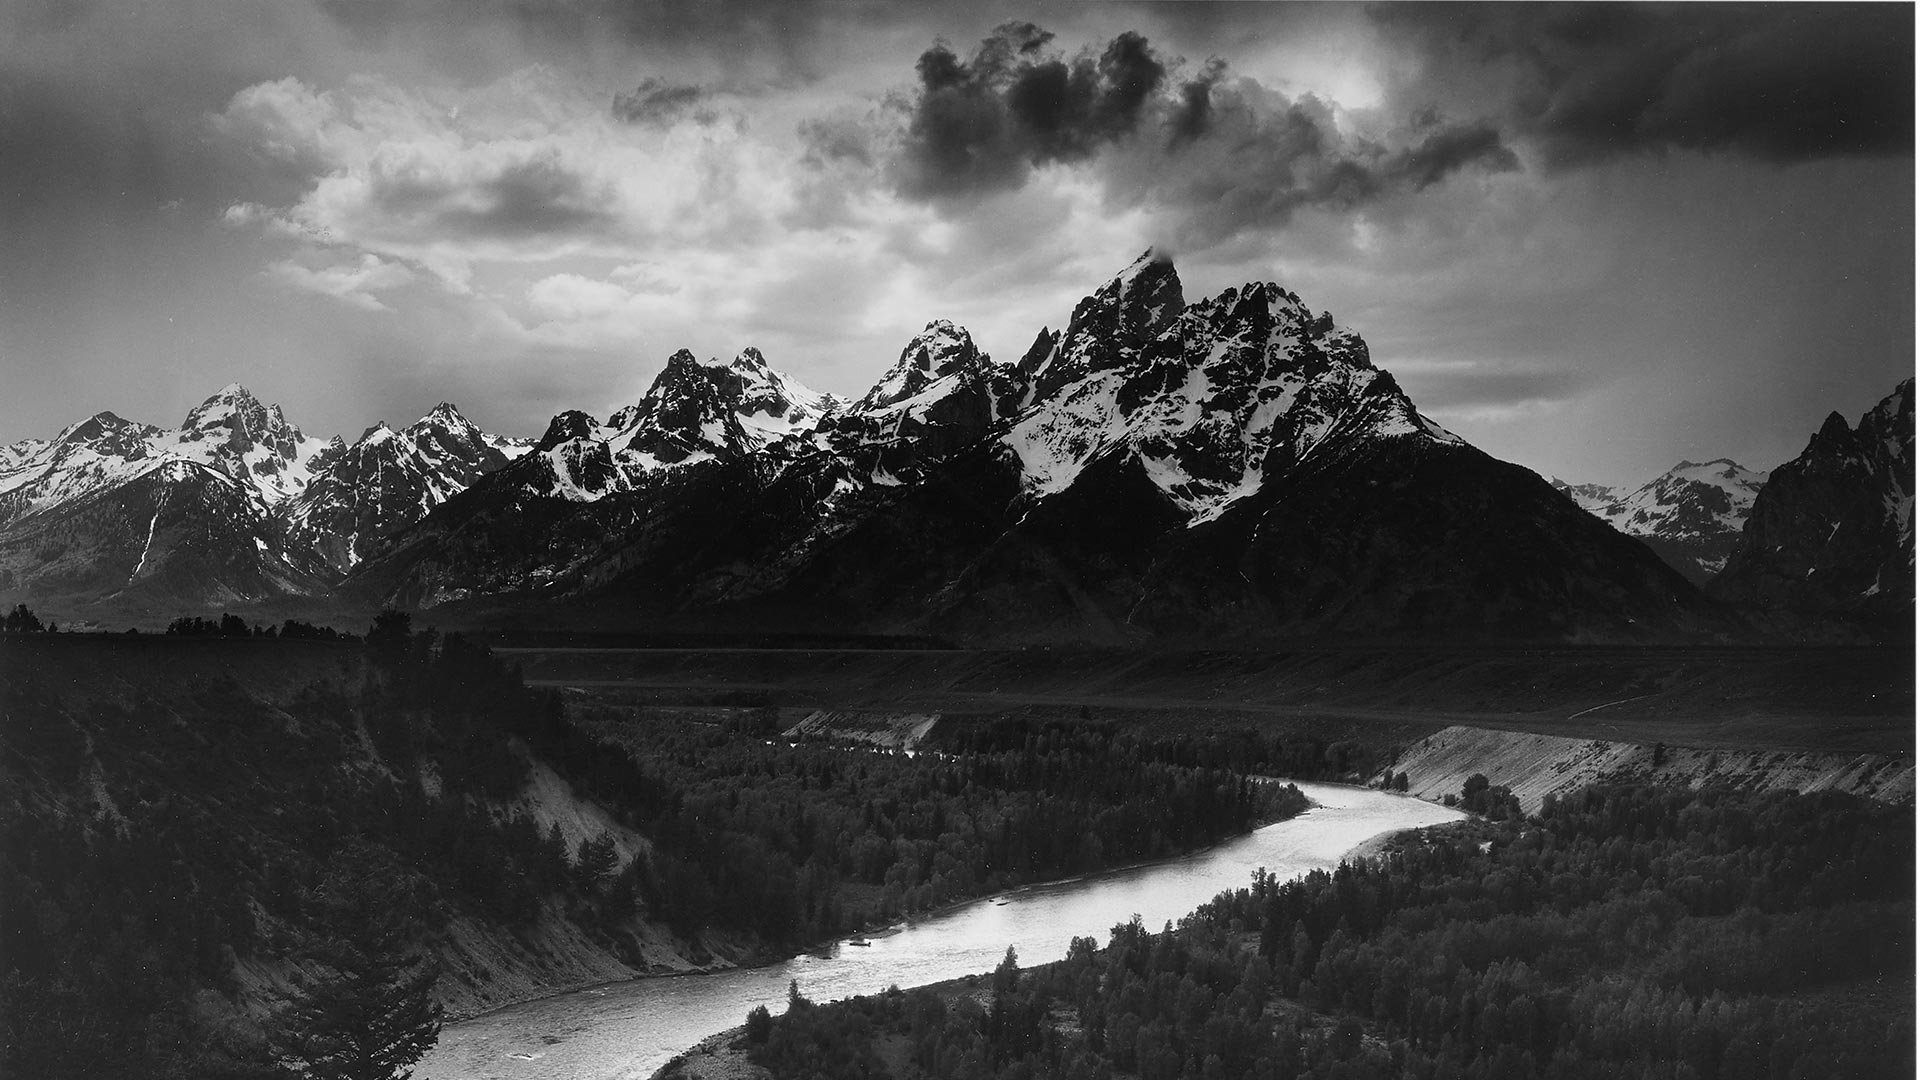 Photo by Ansel Adams, titled The Teton Range and the Snake River.